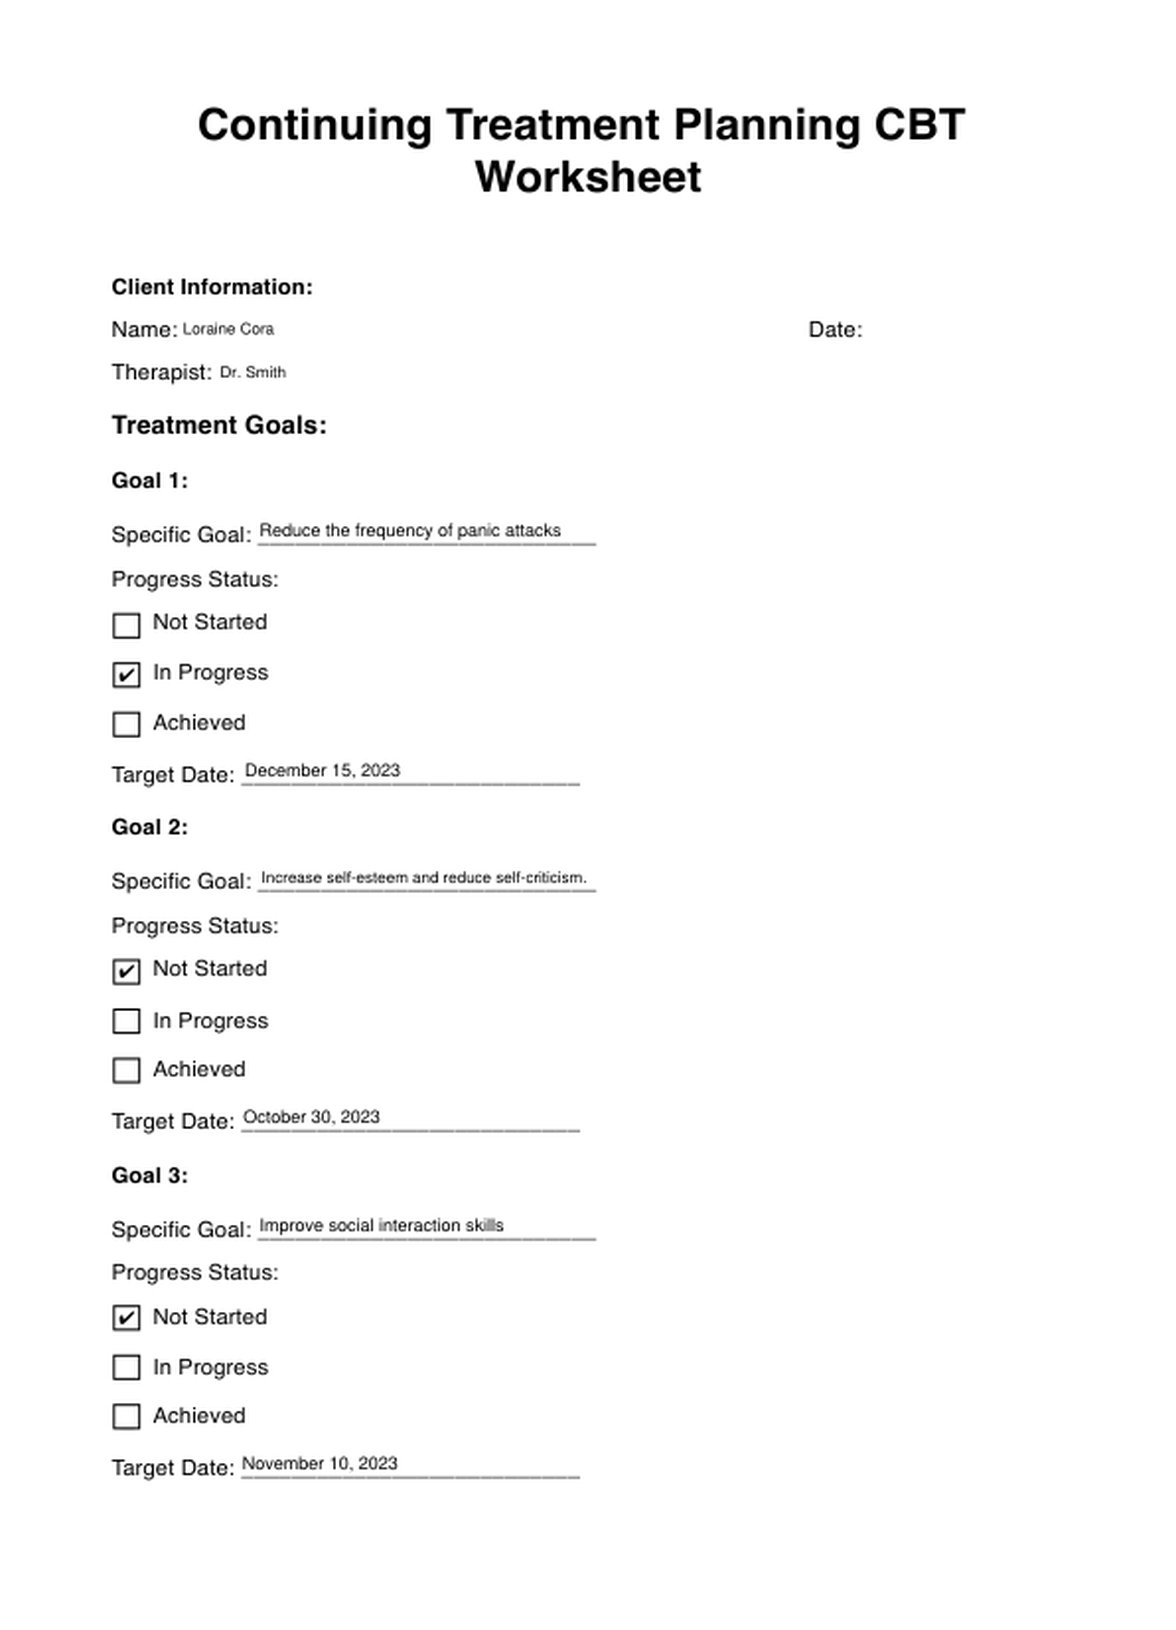 Continuing Treatment Planning CBT Worksheet PDF Example